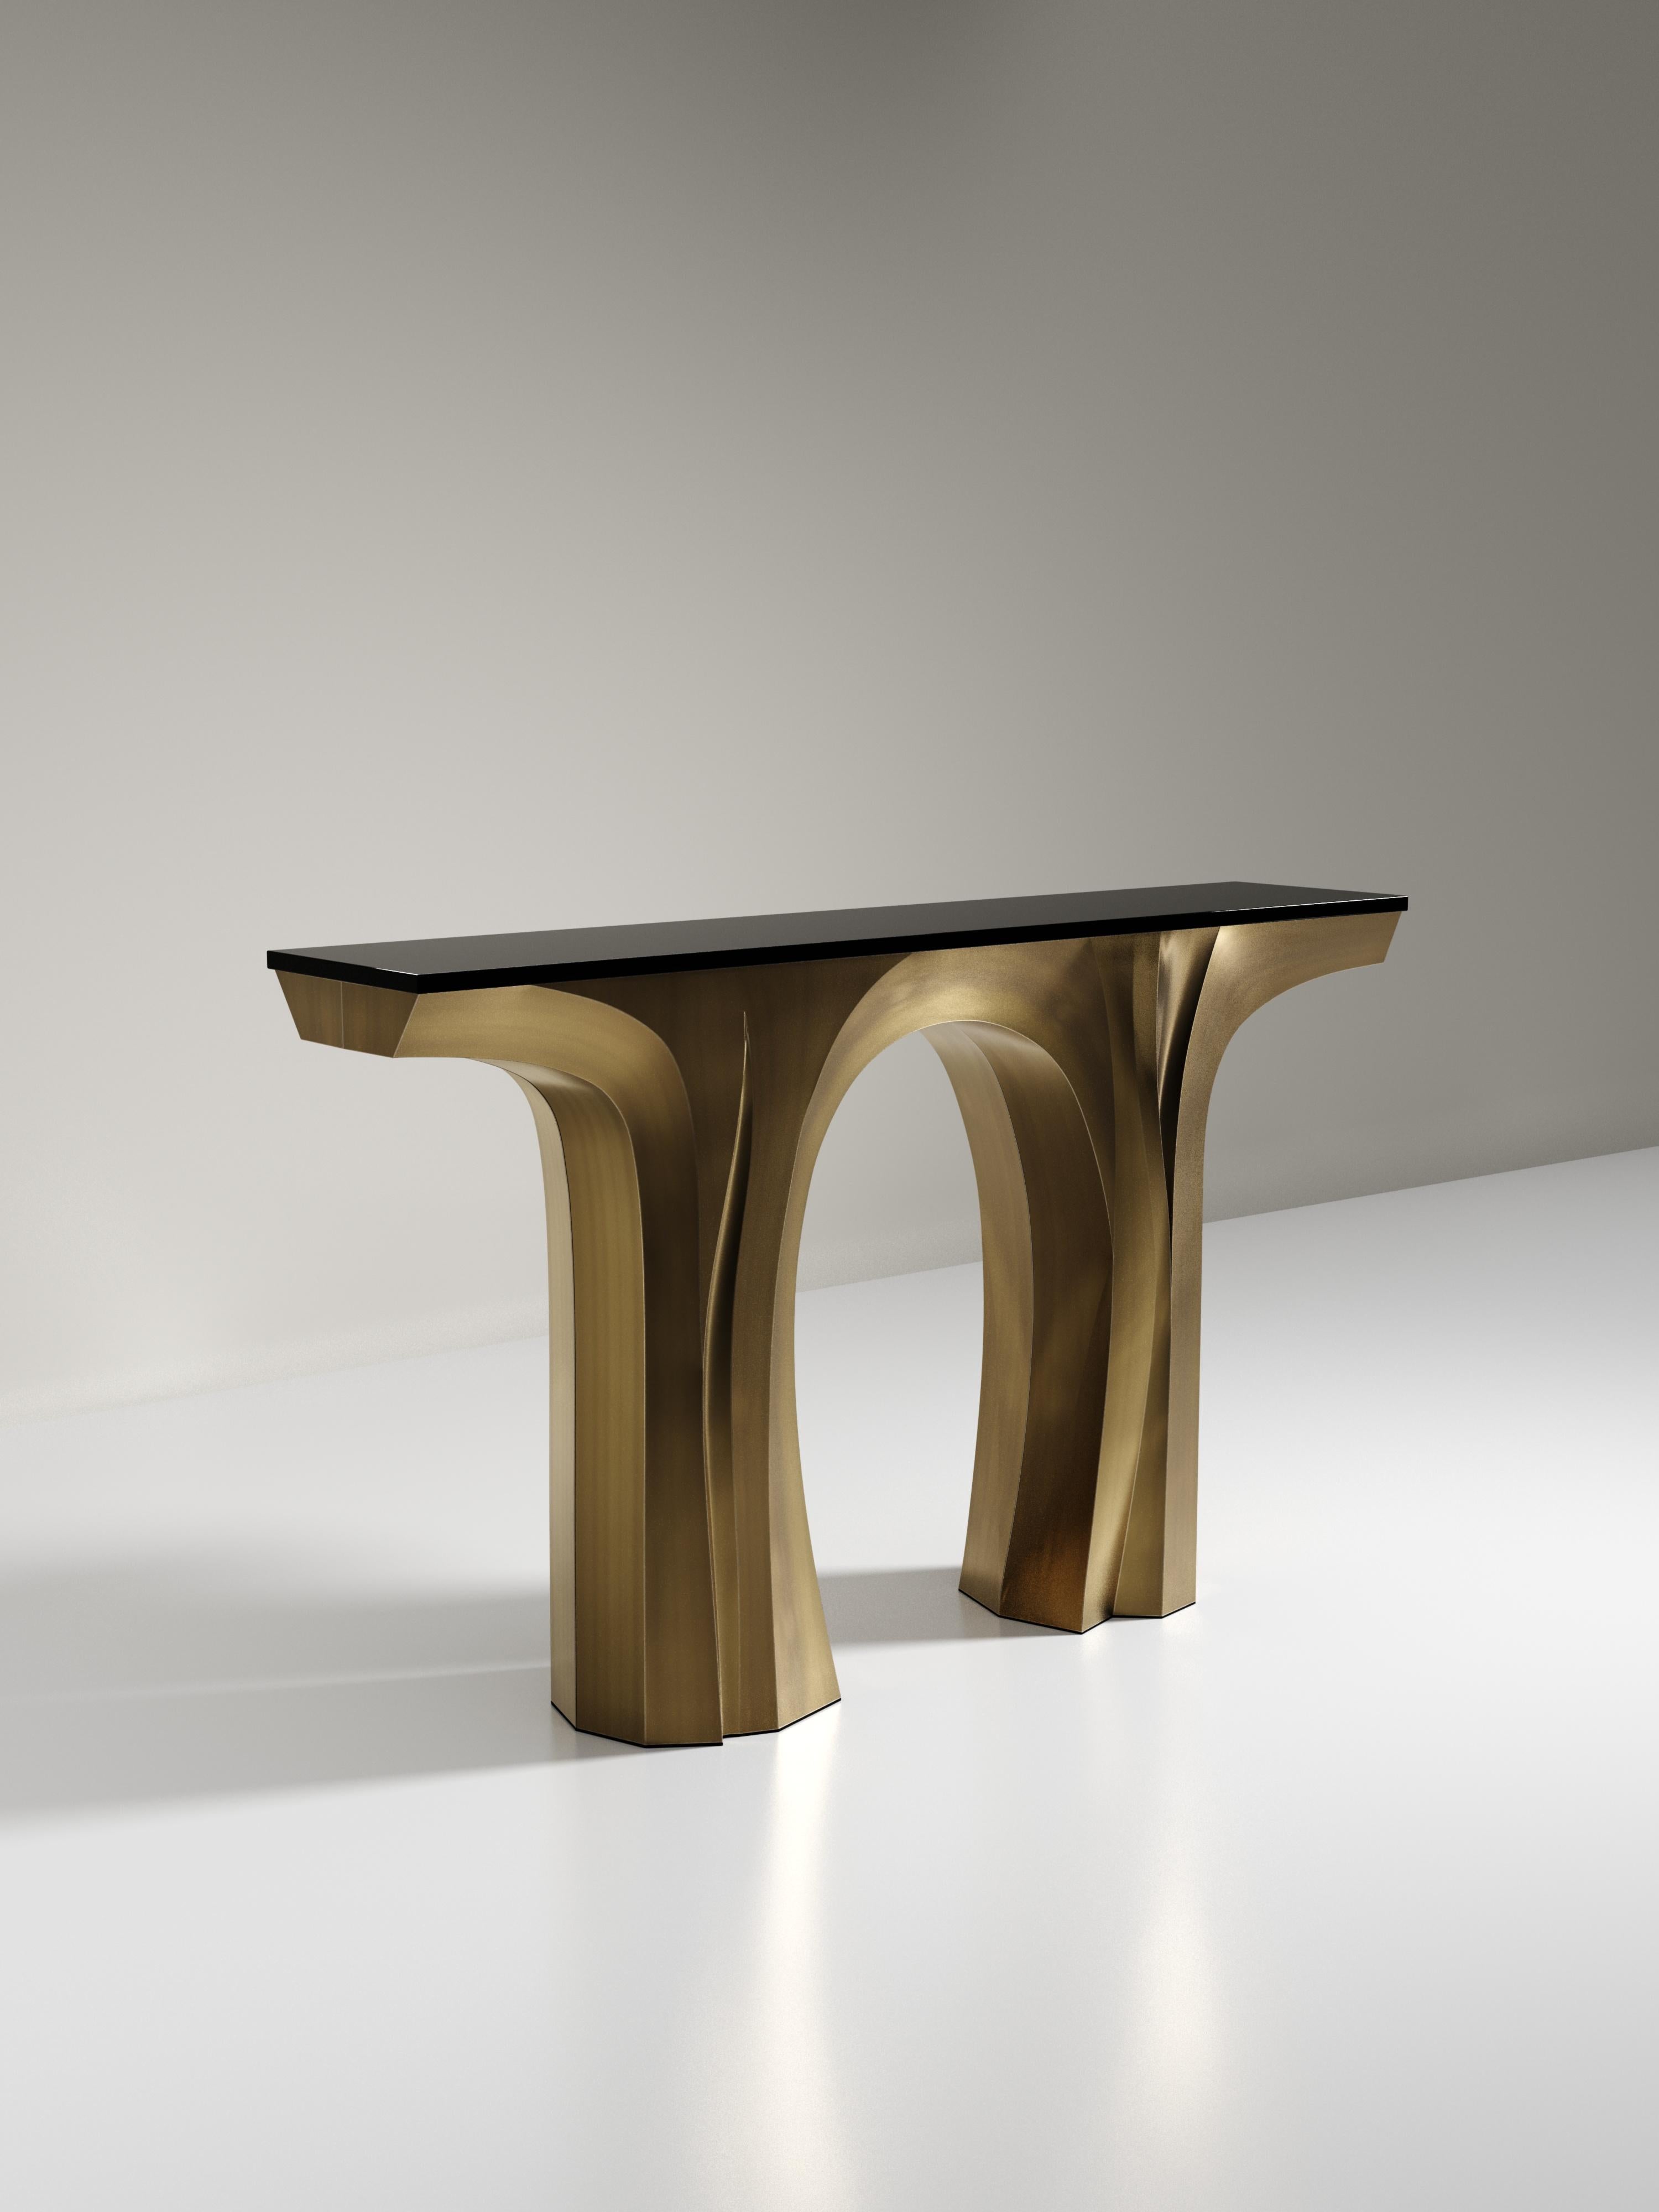 The Alma console by R&Y Augousti is a sculptural and versatile piece. The black pen shell inlaid top morphs into dramatic hand-carved bronze-patina brass legs. The grooves and details on the base allow the console to have different expressions from